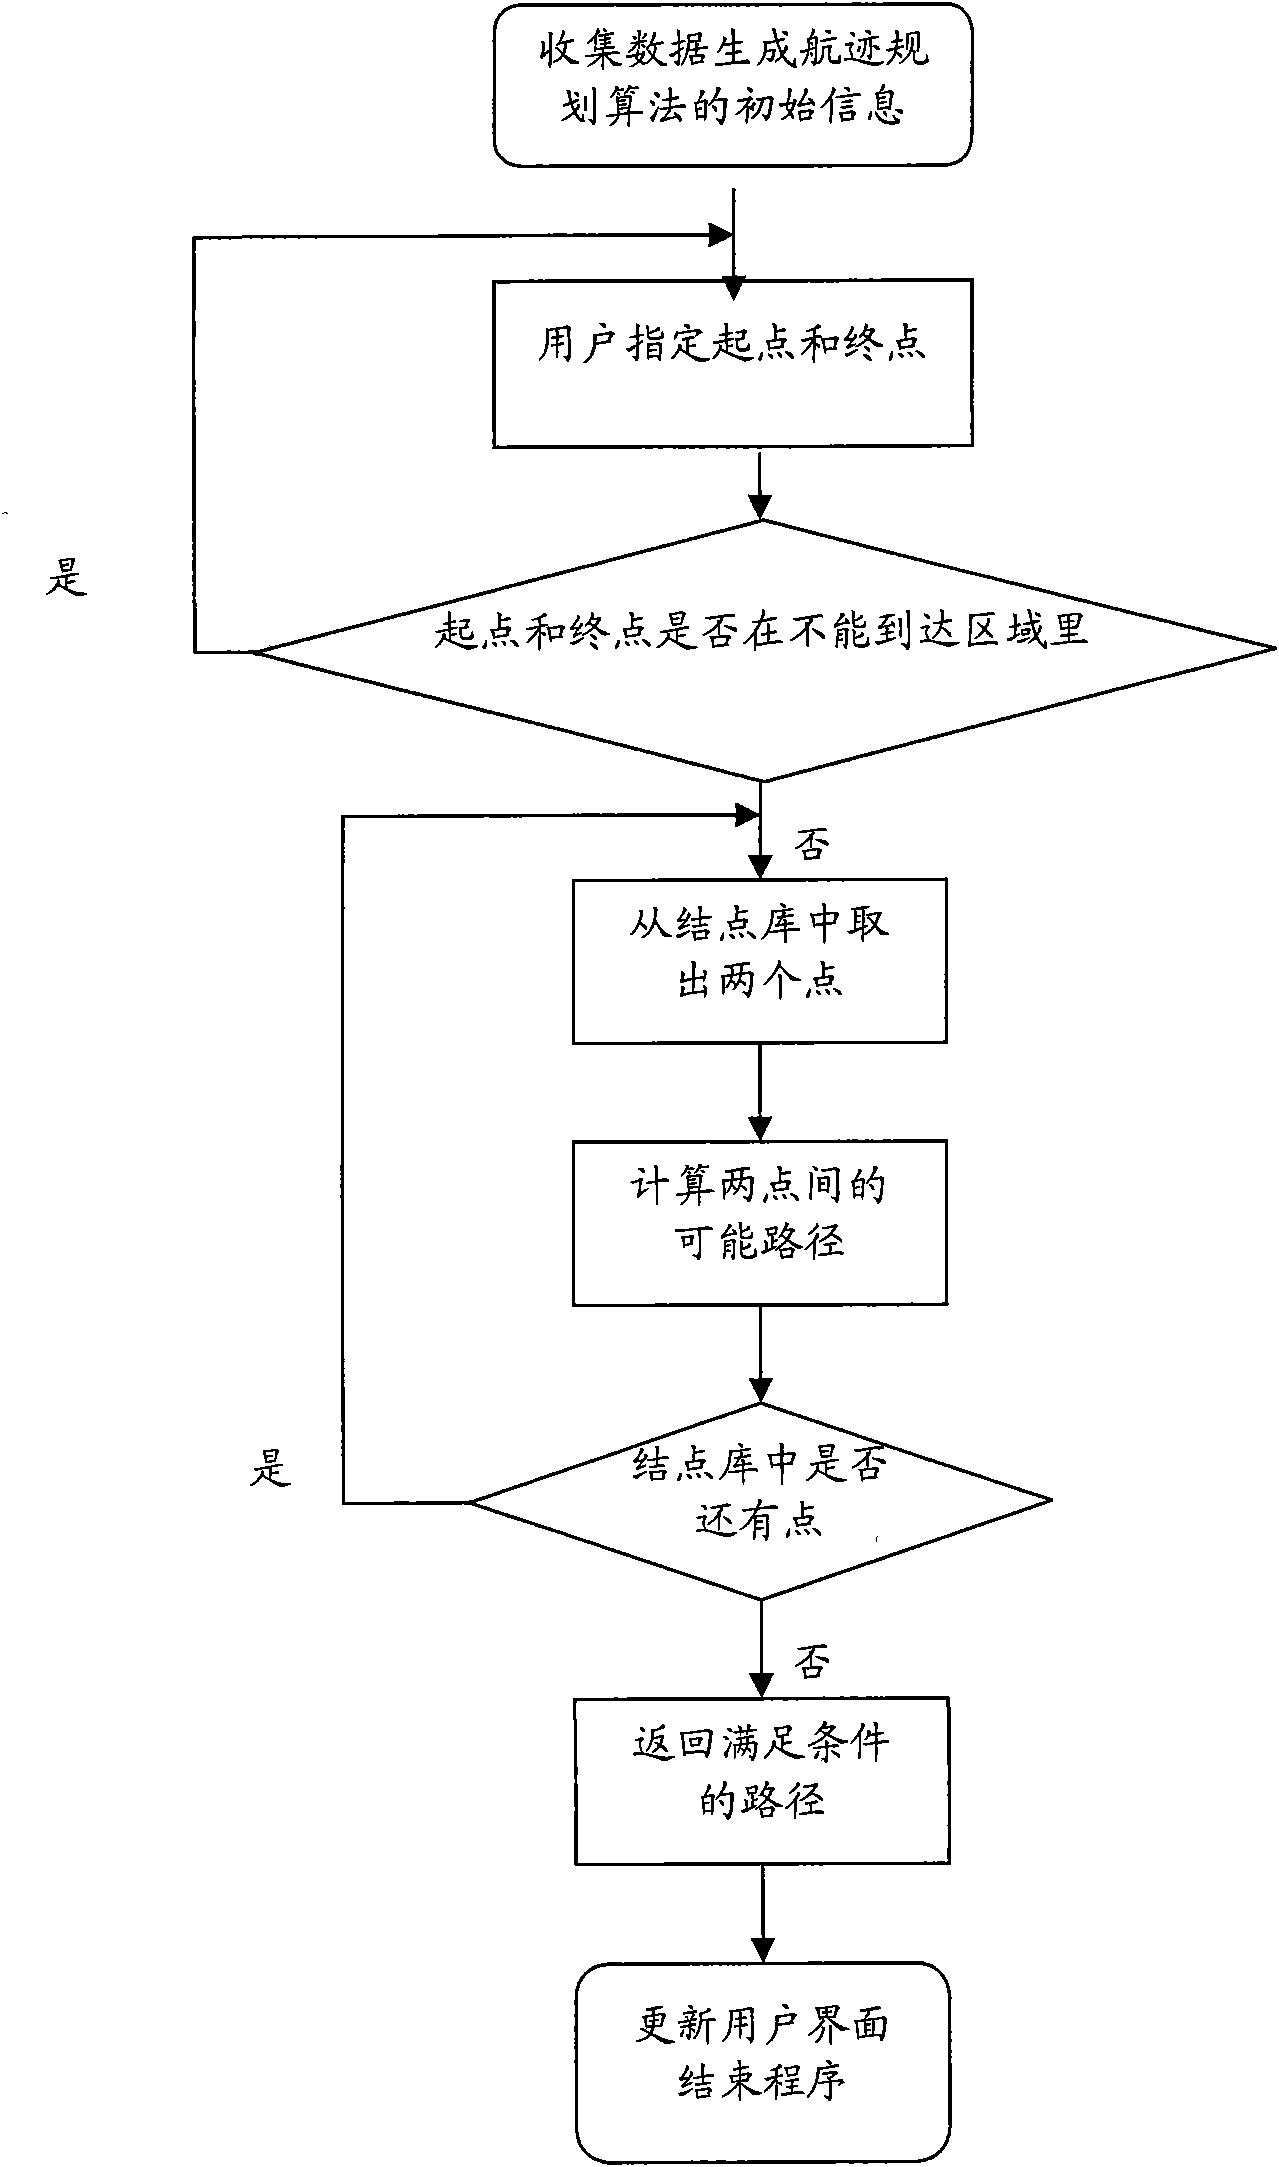 Two-dimensional navigation path planning method based on vector electronic chart